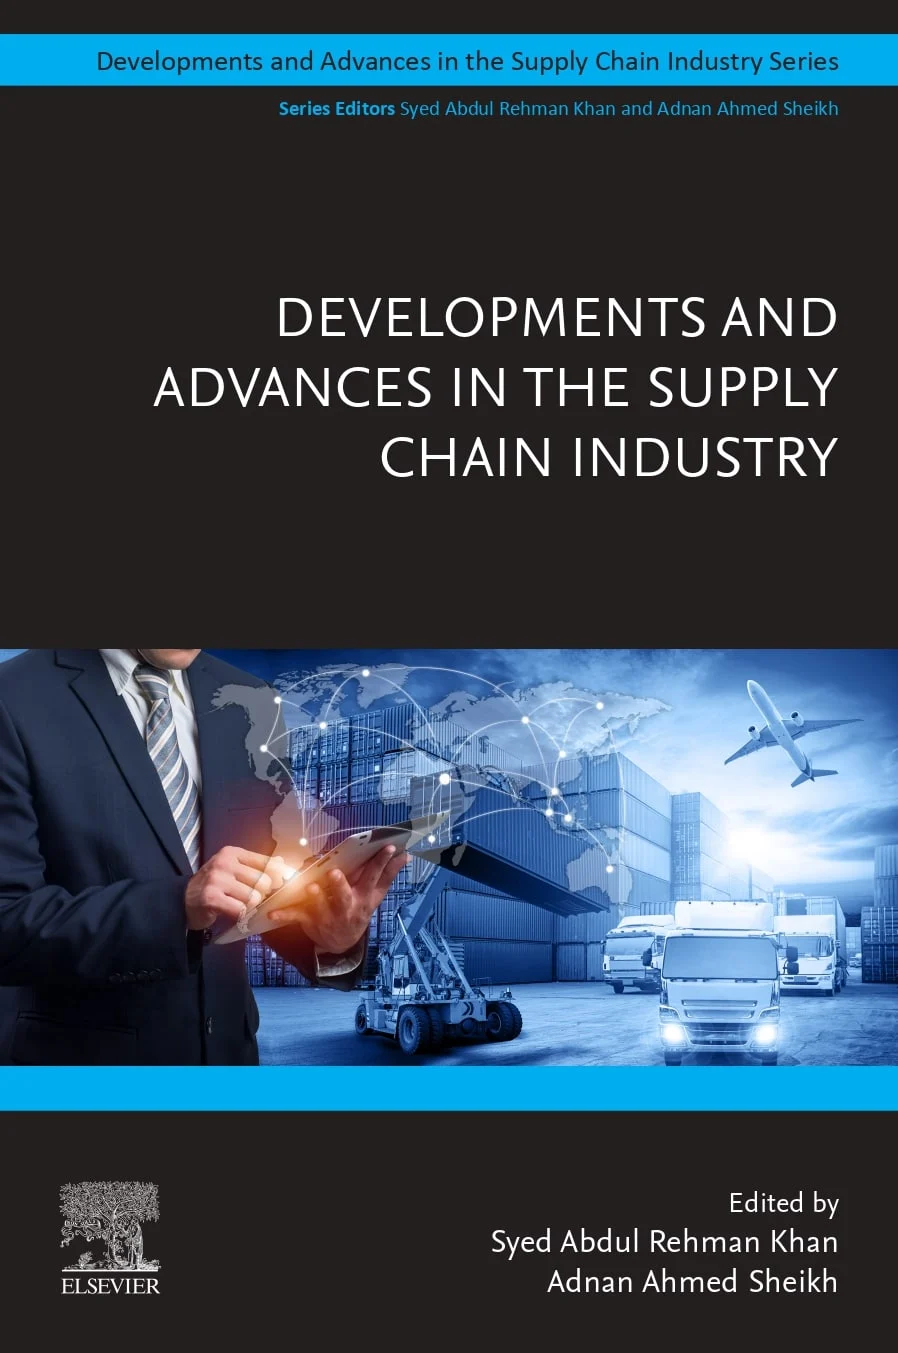 Developments and advances in the supply chain industry book cover